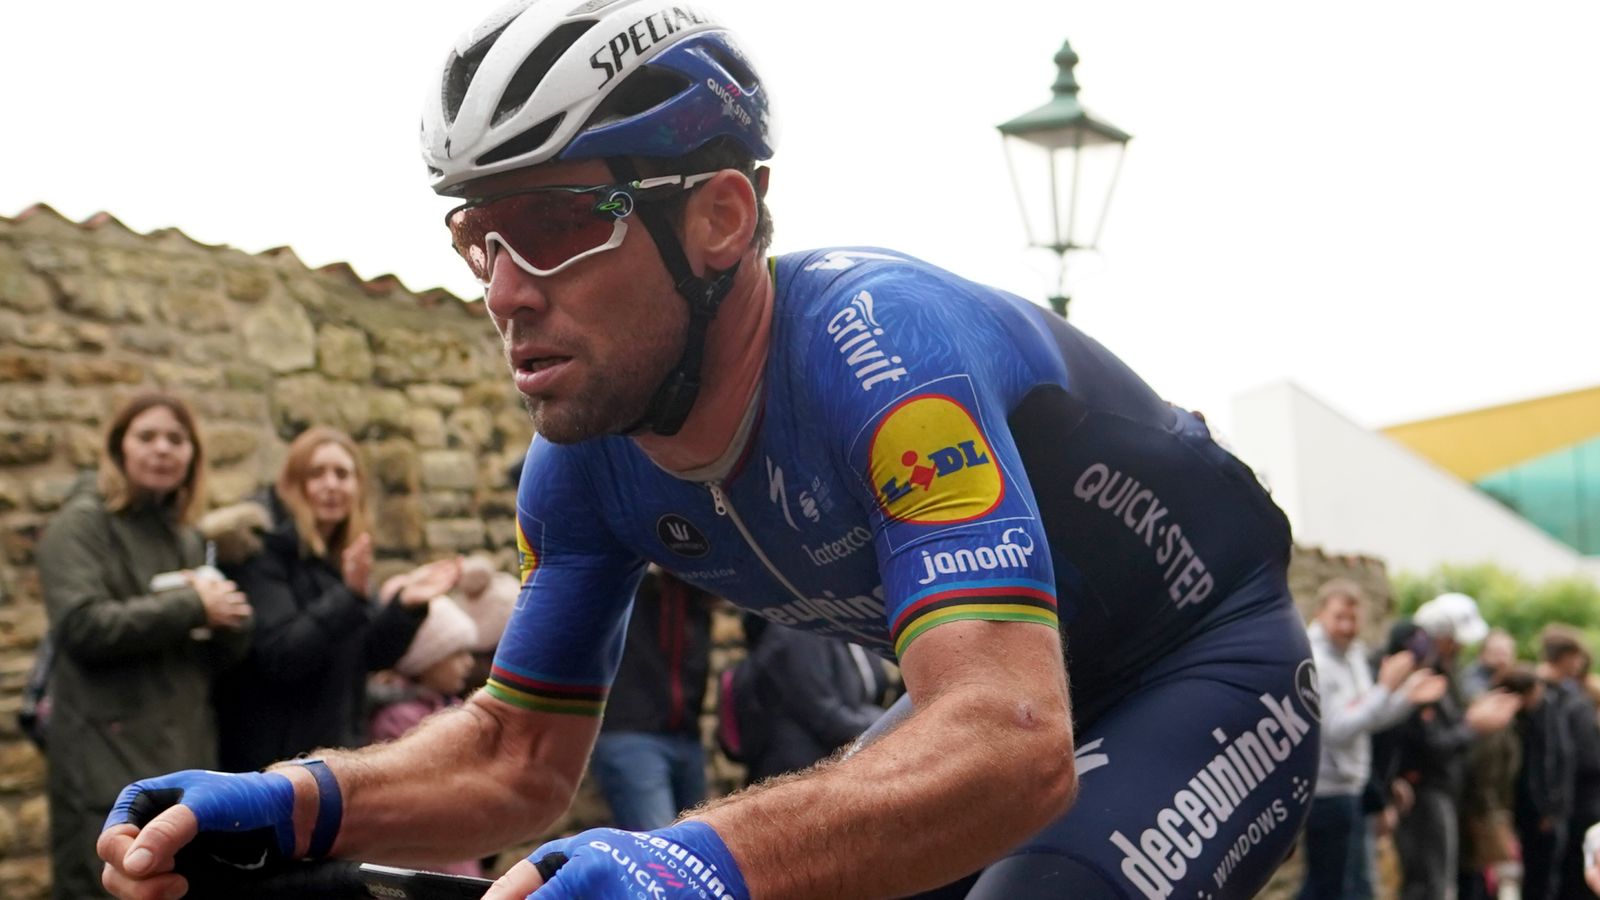 Mark Cavendish misses out on Tour de France selection as QuickStep-AlphaVinyl name joint record holder as reserve